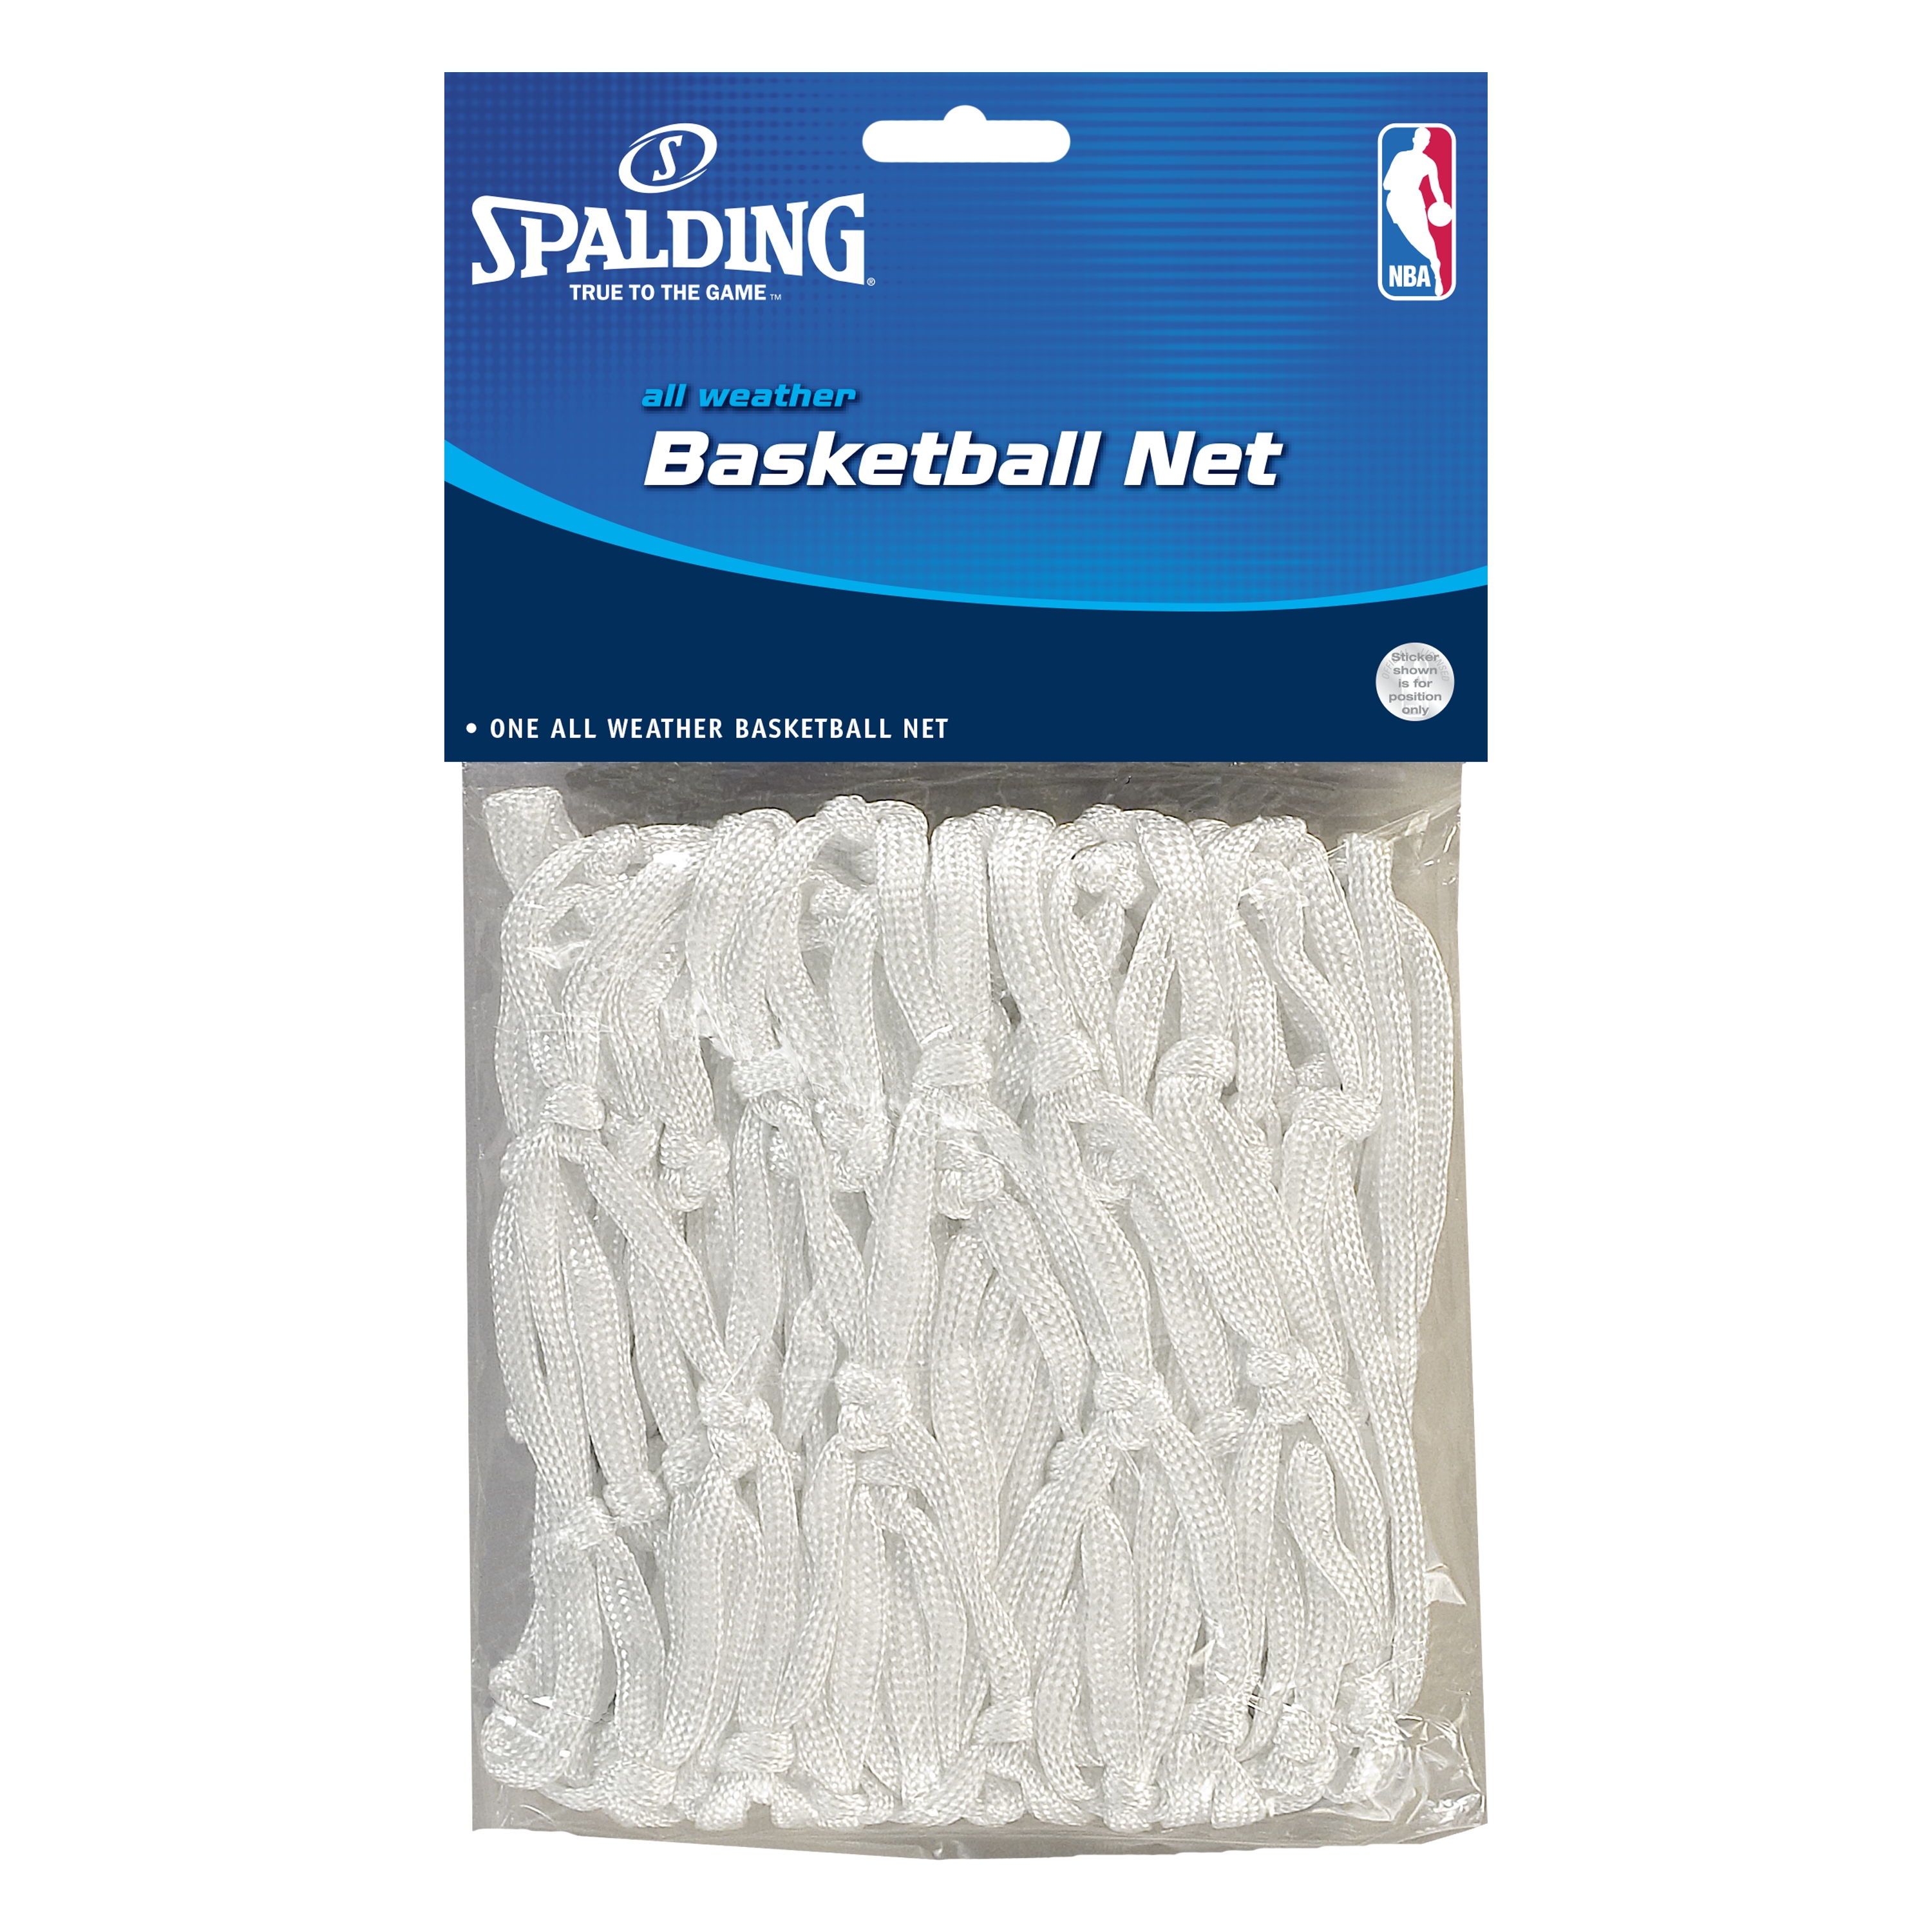 Spalding NBA All Weather Net - image 1 of 2